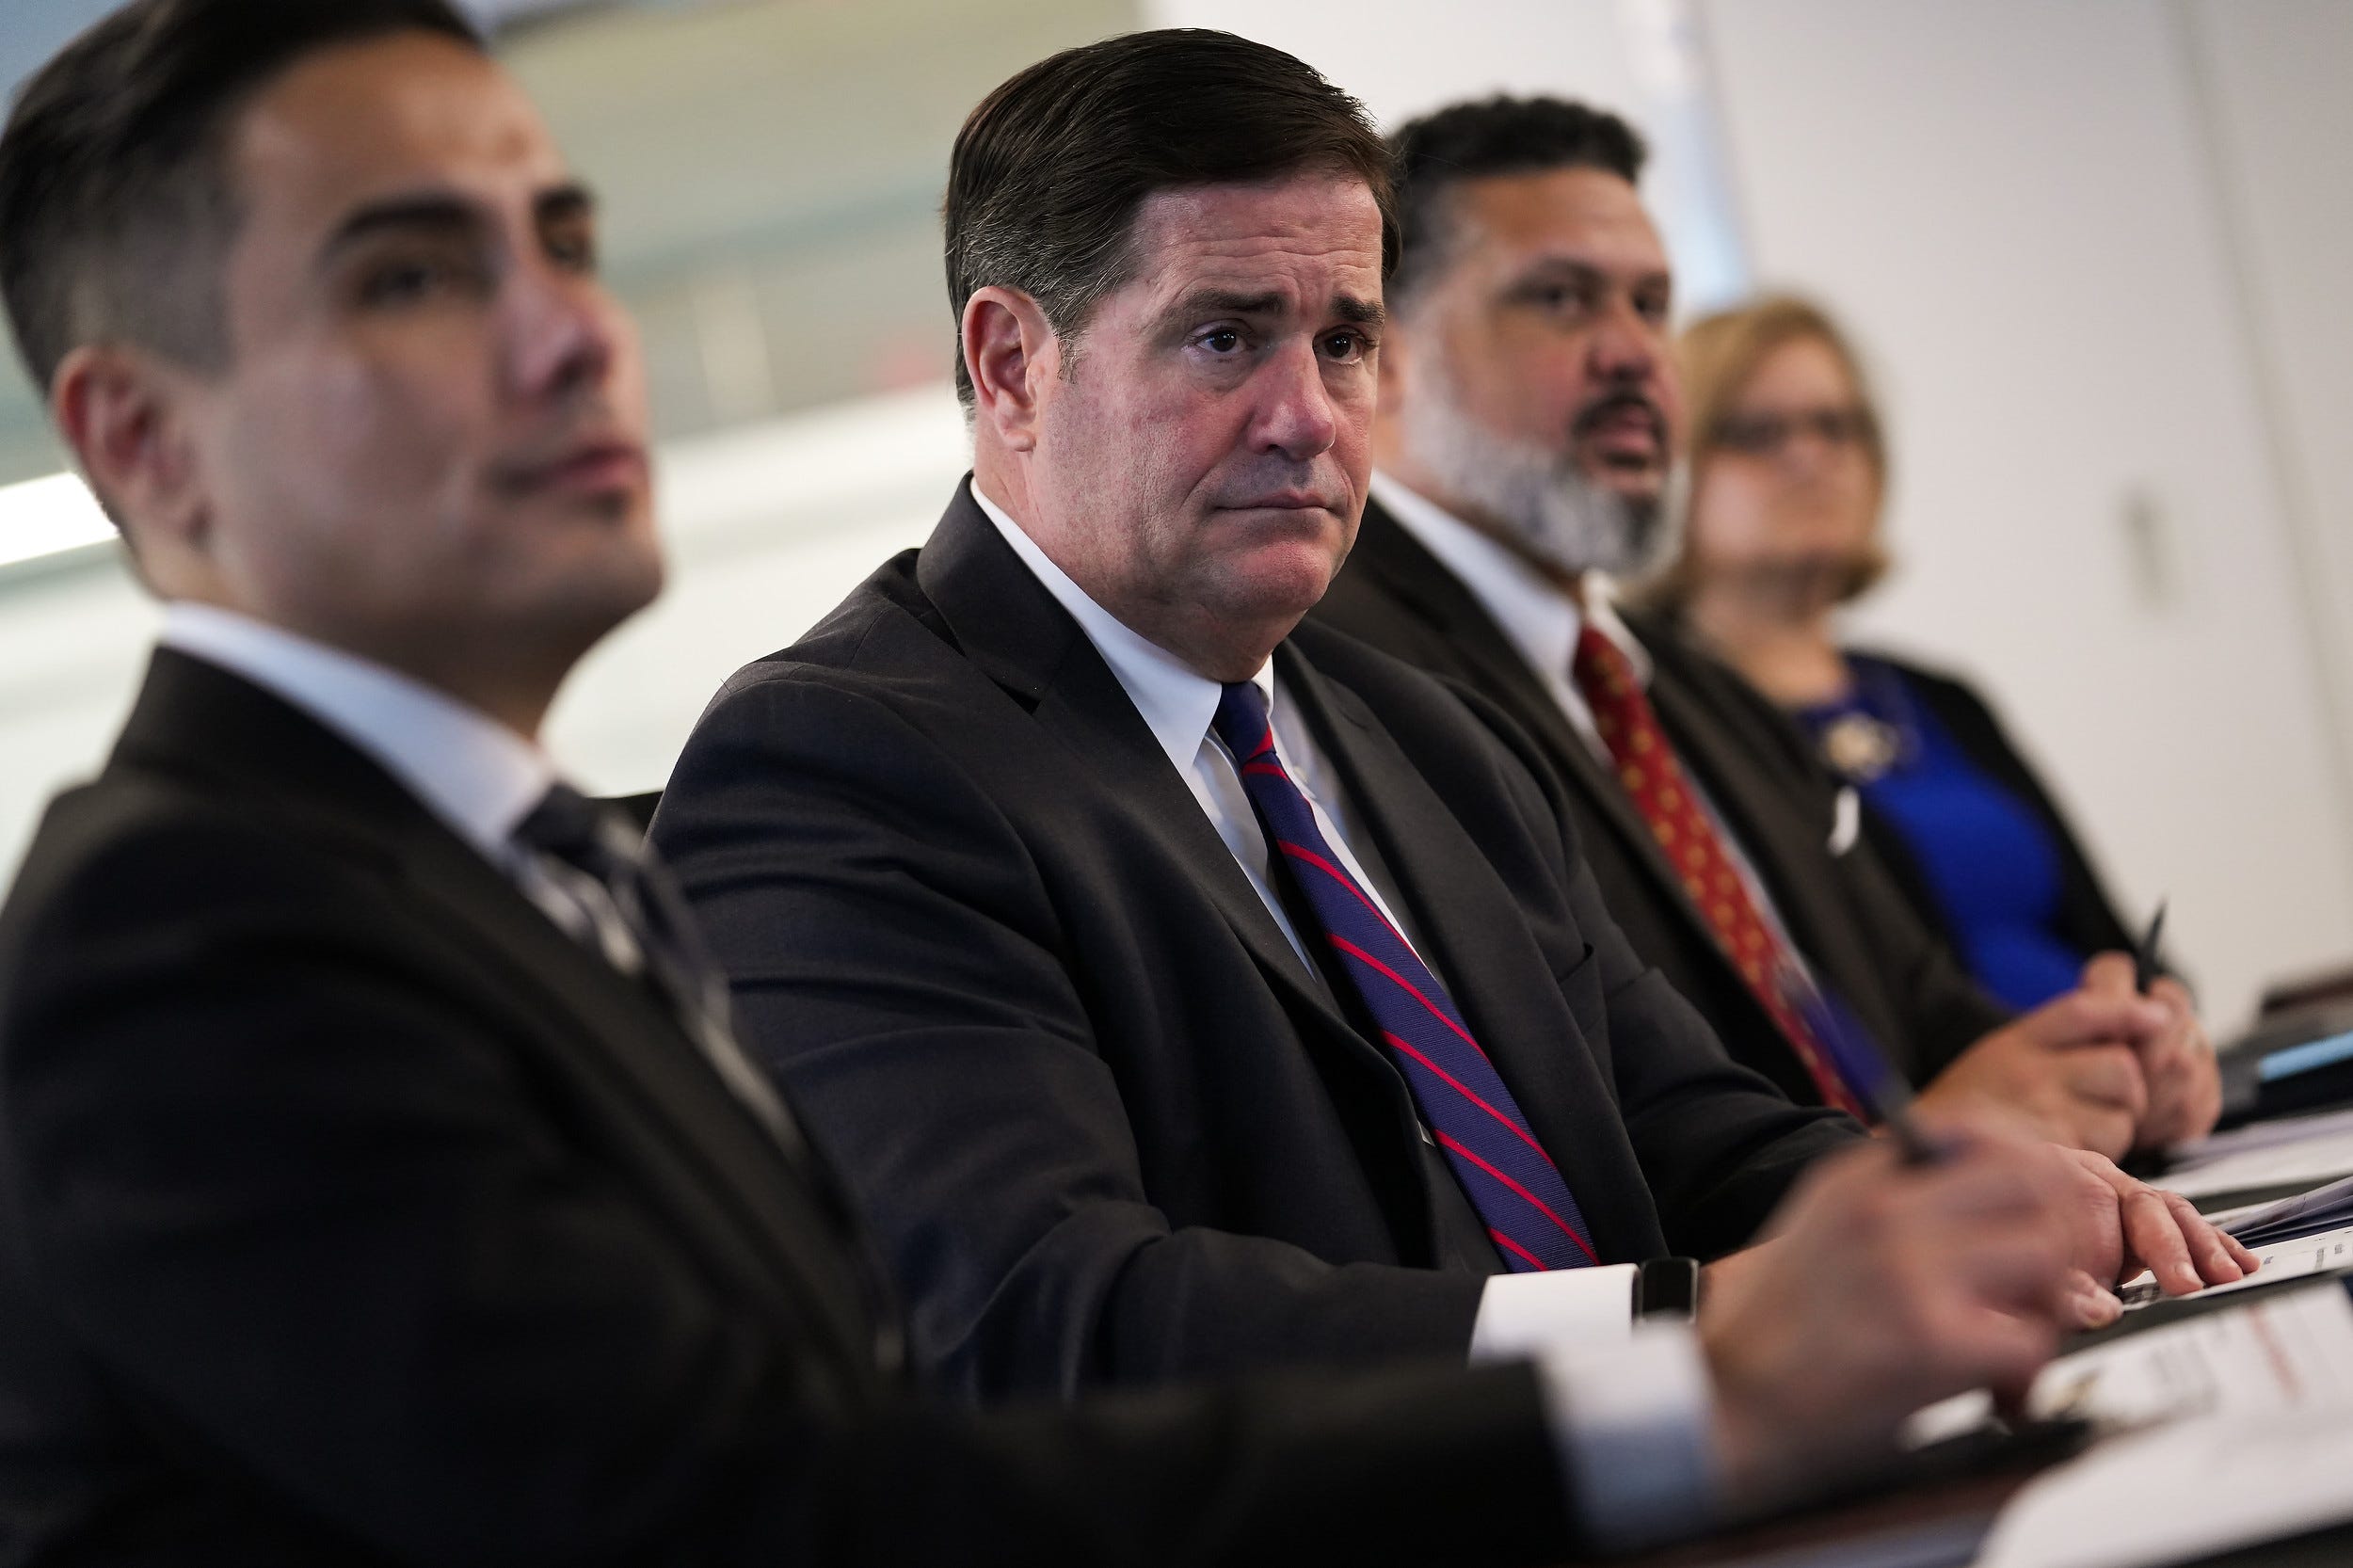 Gov. Doug Ducey listens to presentations from various Arizona agency directors during his last cabinet meeting as governor on Dec. 8, 2022, in Phoenix.